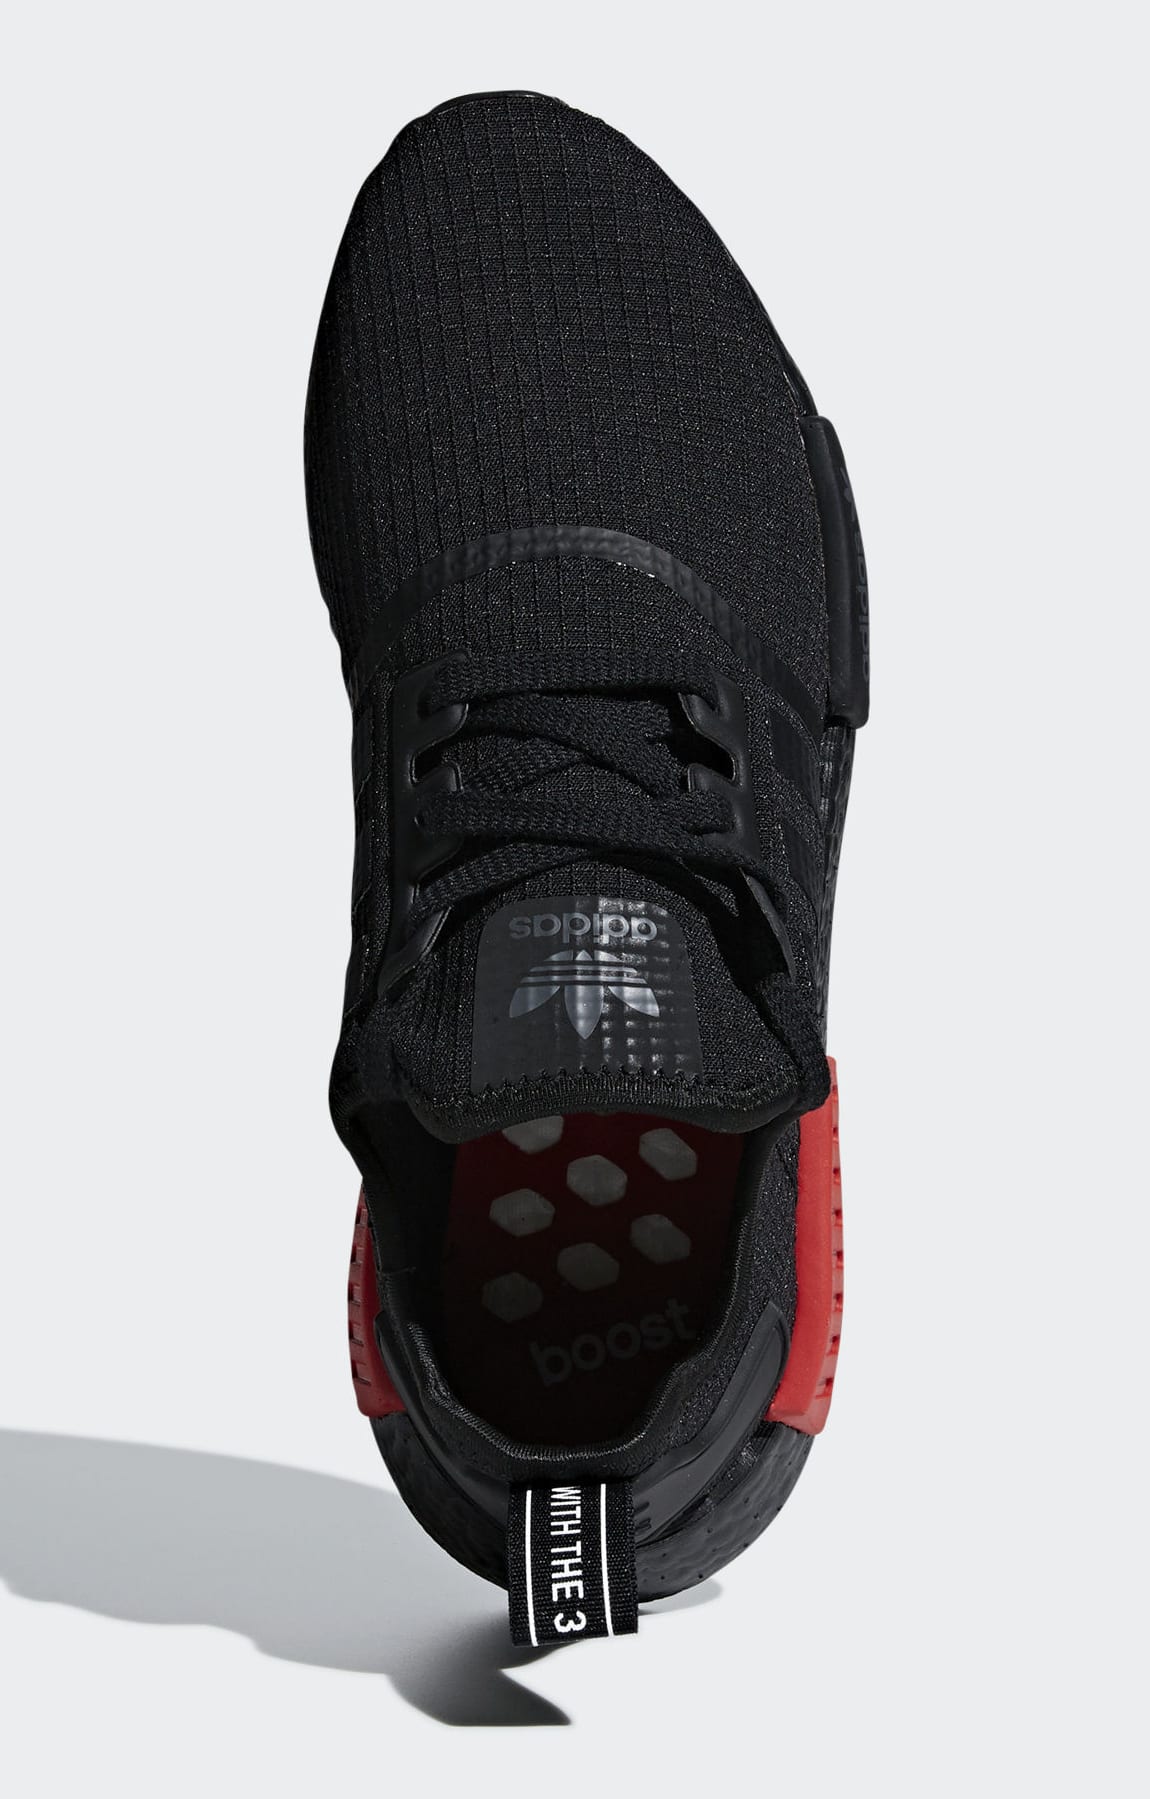 adidas-nmd-r1-bred-release-date-b37618-top